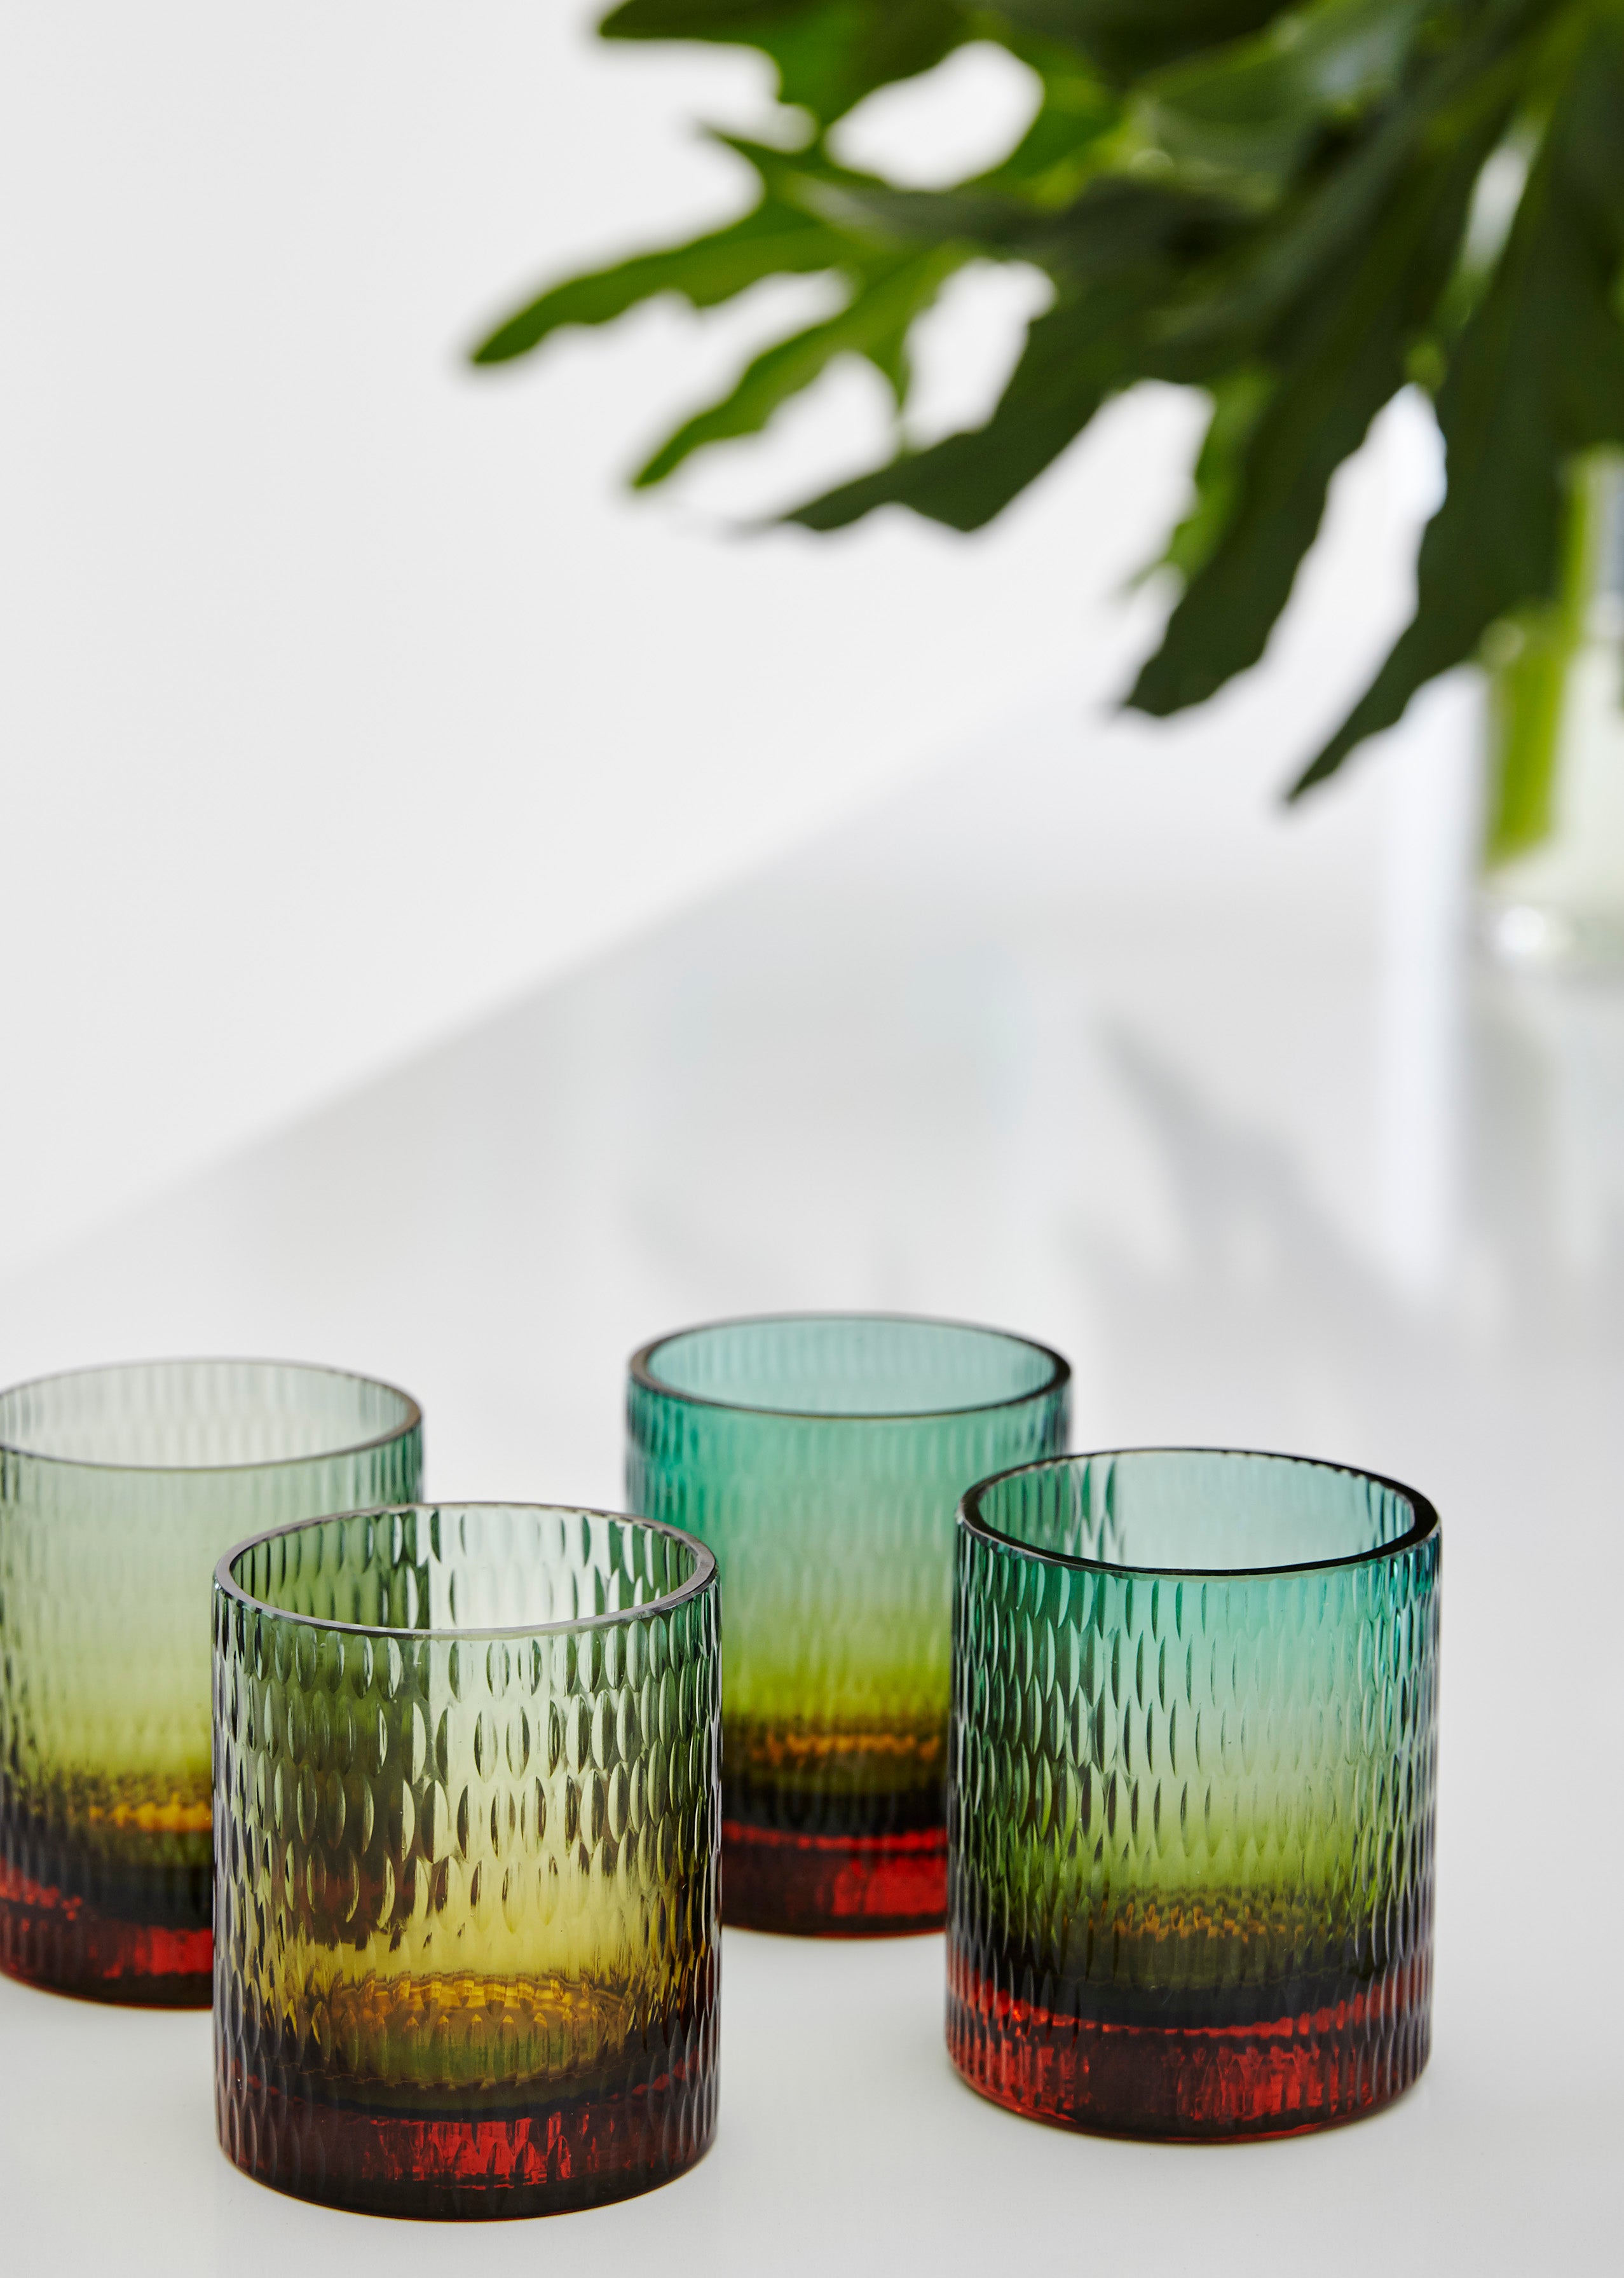 PRE-ORDER Bottoms Up Glass Turquoise/Melon